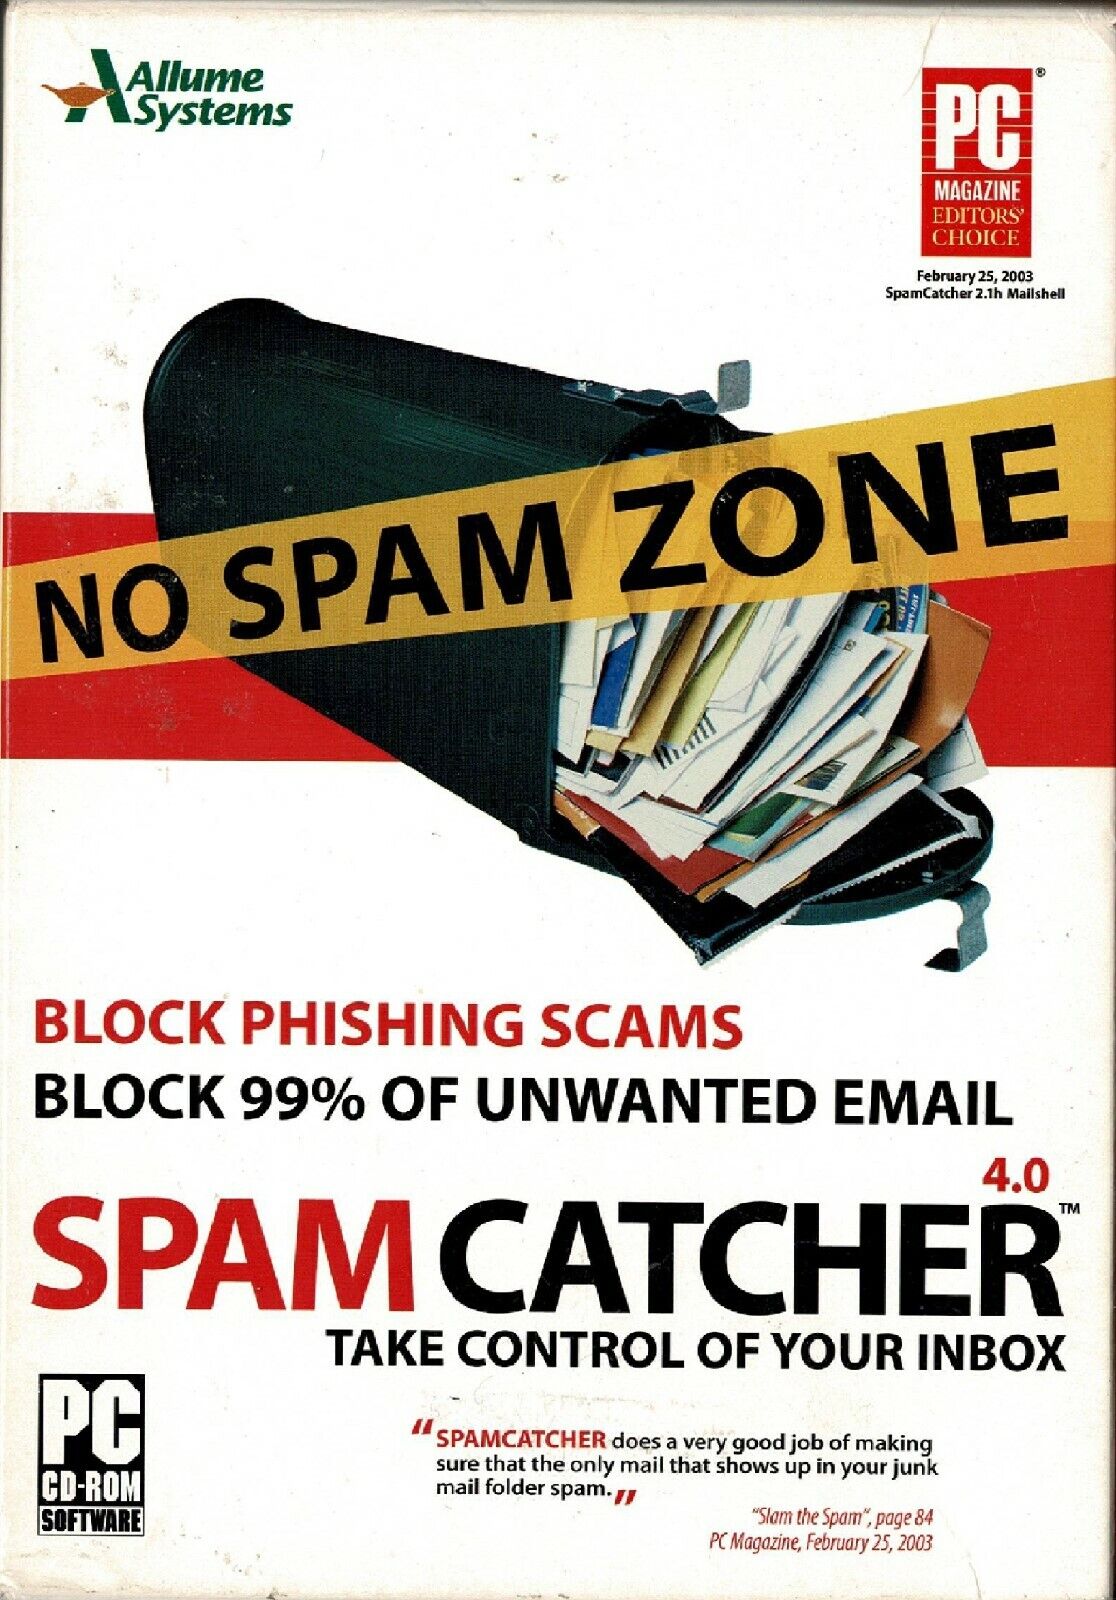 Allume Spam Catcher 4.0 Pc New Sealed Box XP Block Email & Phishing Take Control